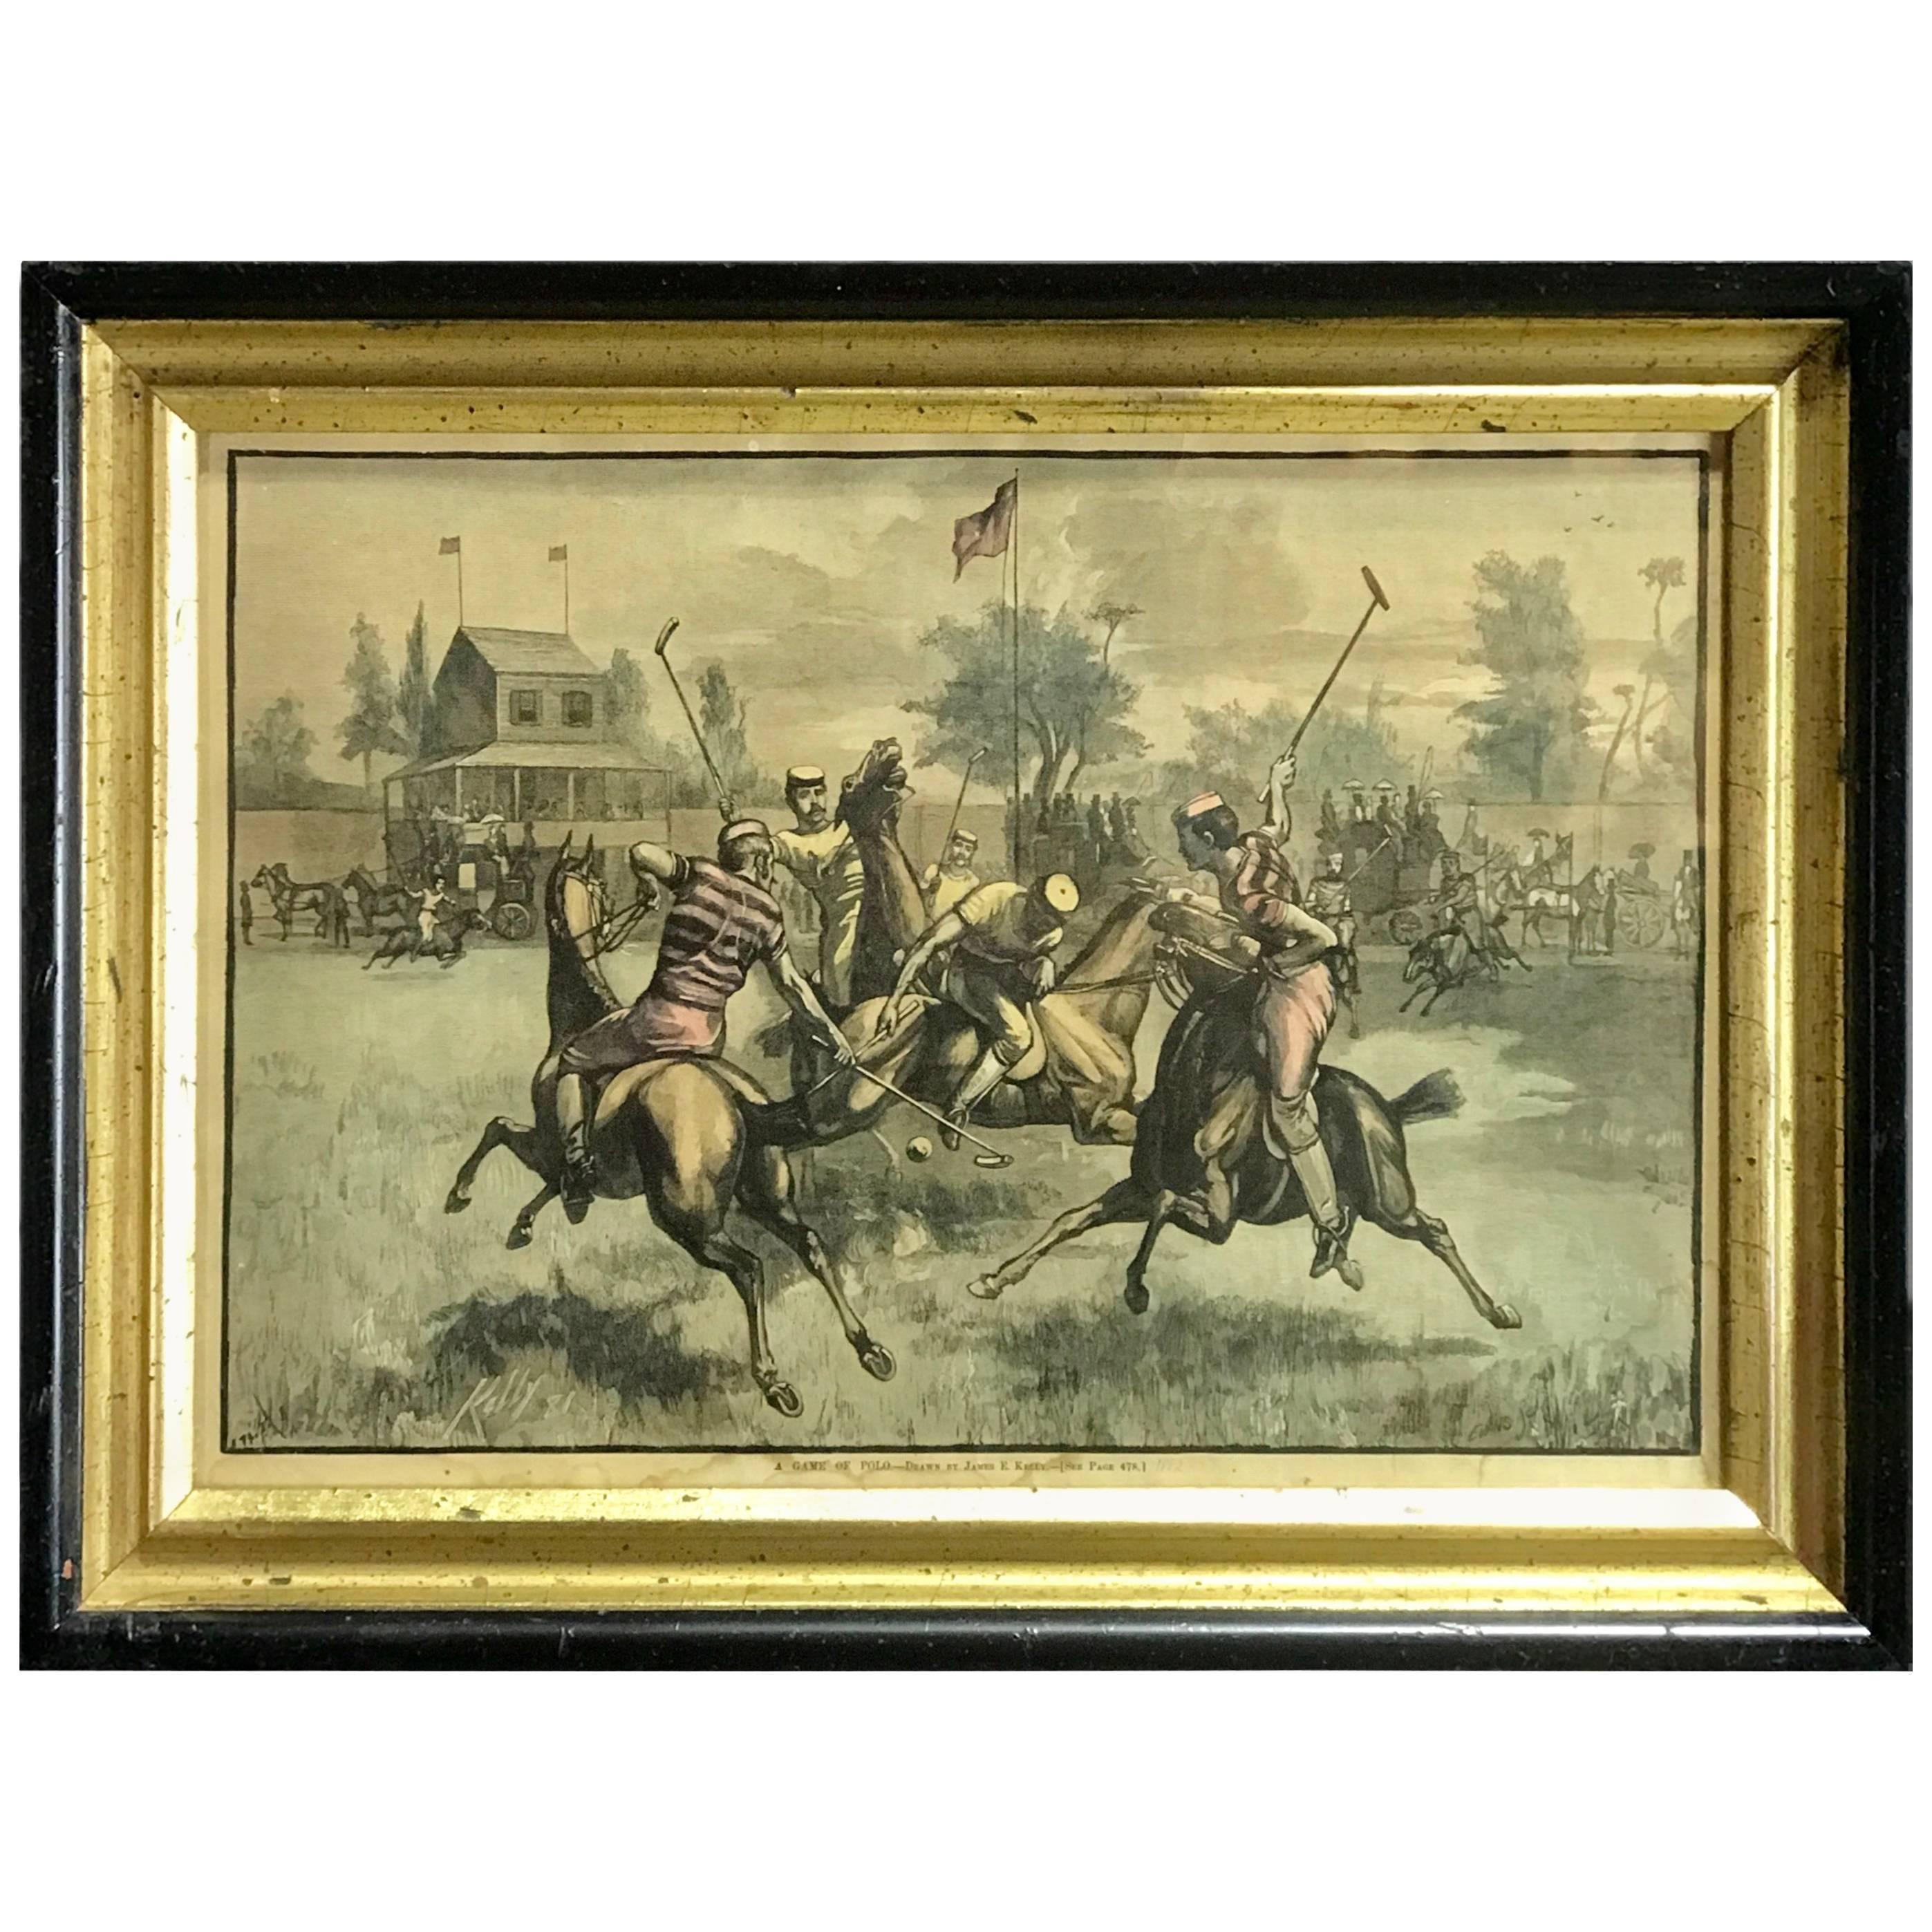 19th Century Colored Print "A Game of Polo"